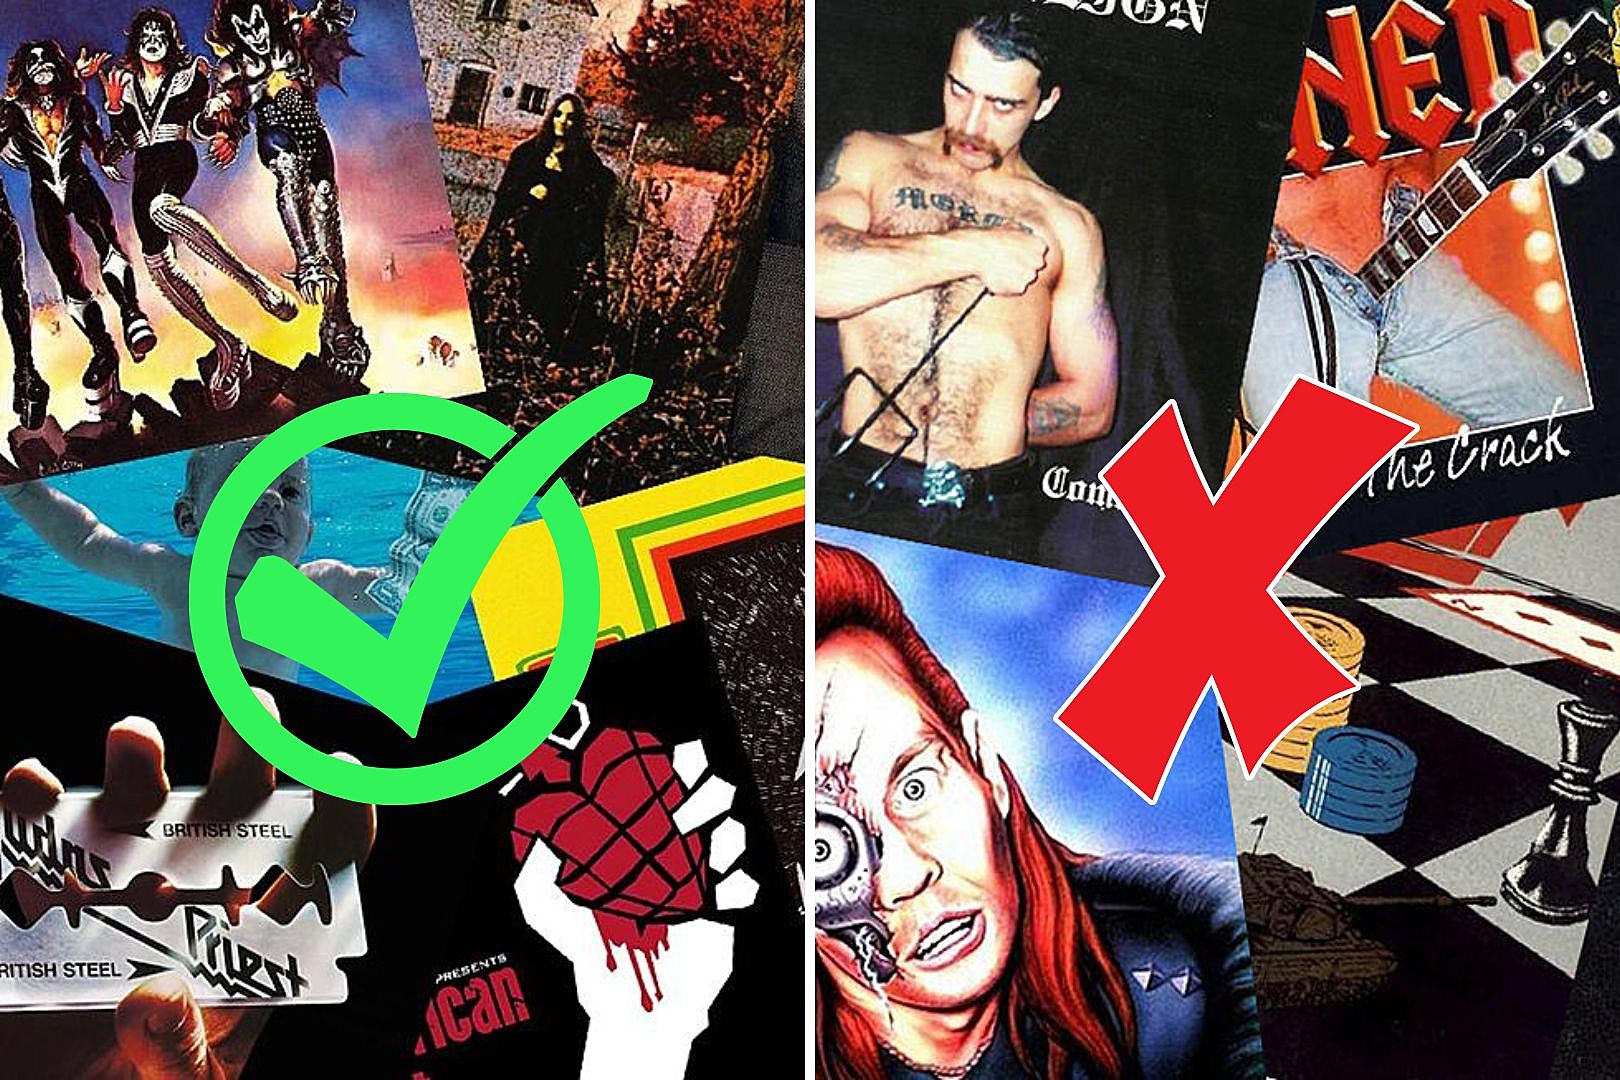 30 Most Iconic Rock + Metal Album Covers + 50 of the The Worst